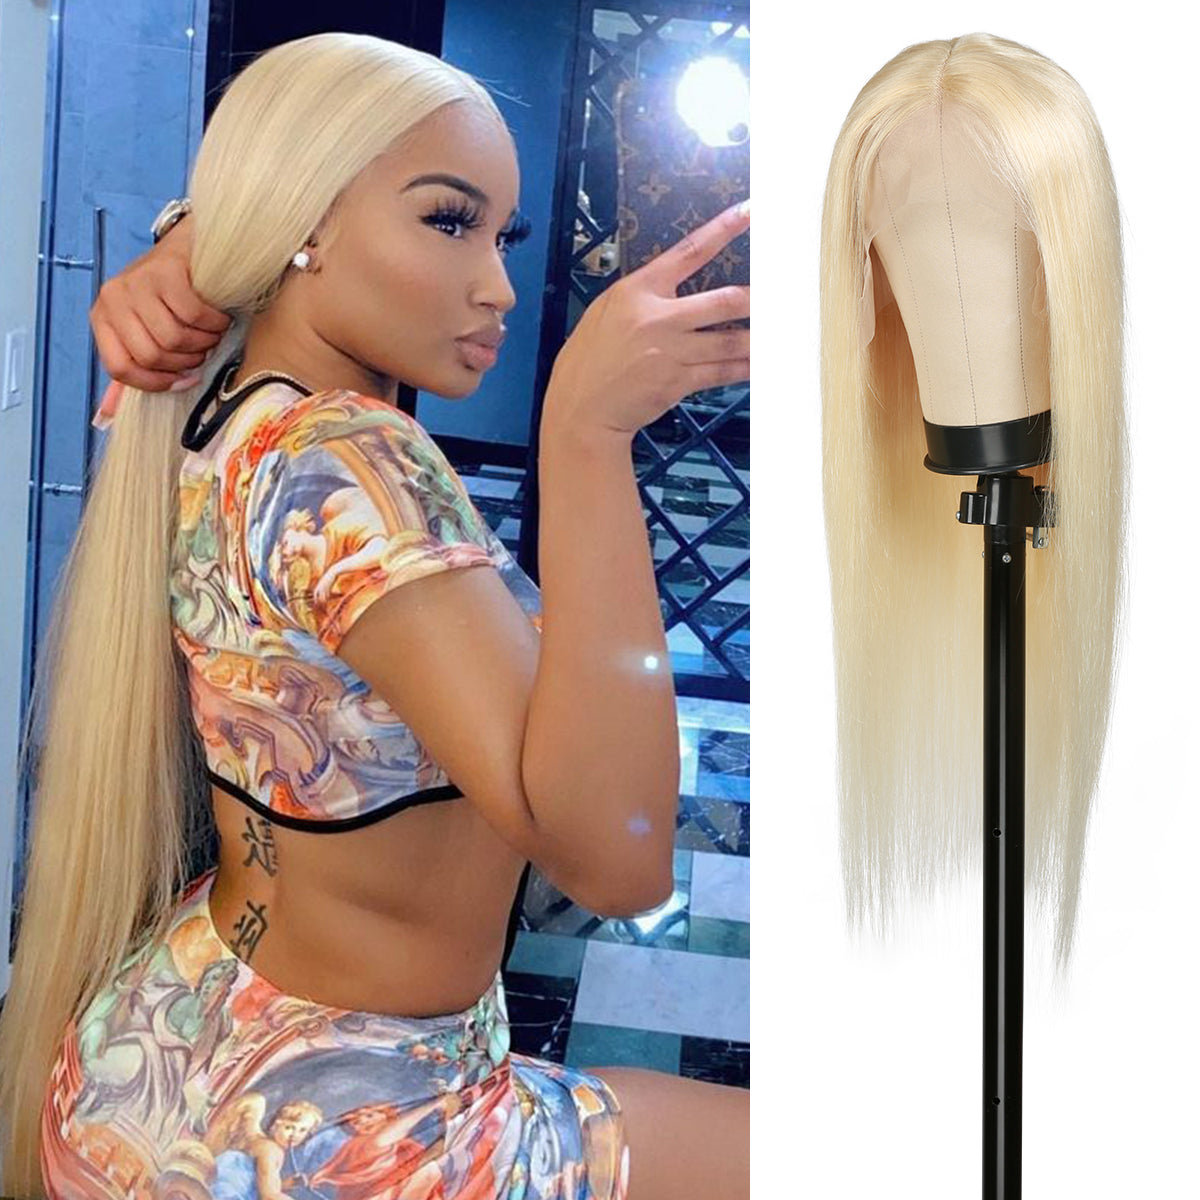 Most affordable human hair lace wig, Exclusively developed and defined lace wigs by AliHairs, Silky smooth texture, Long straight hairstyle, Pre-Plucked with Baby Hair, 613 Blonde, ash blonde, Hair is already pre-bleached and pre-customized, You can dye and perm, Flattering color and style, The wig comes ready to use.